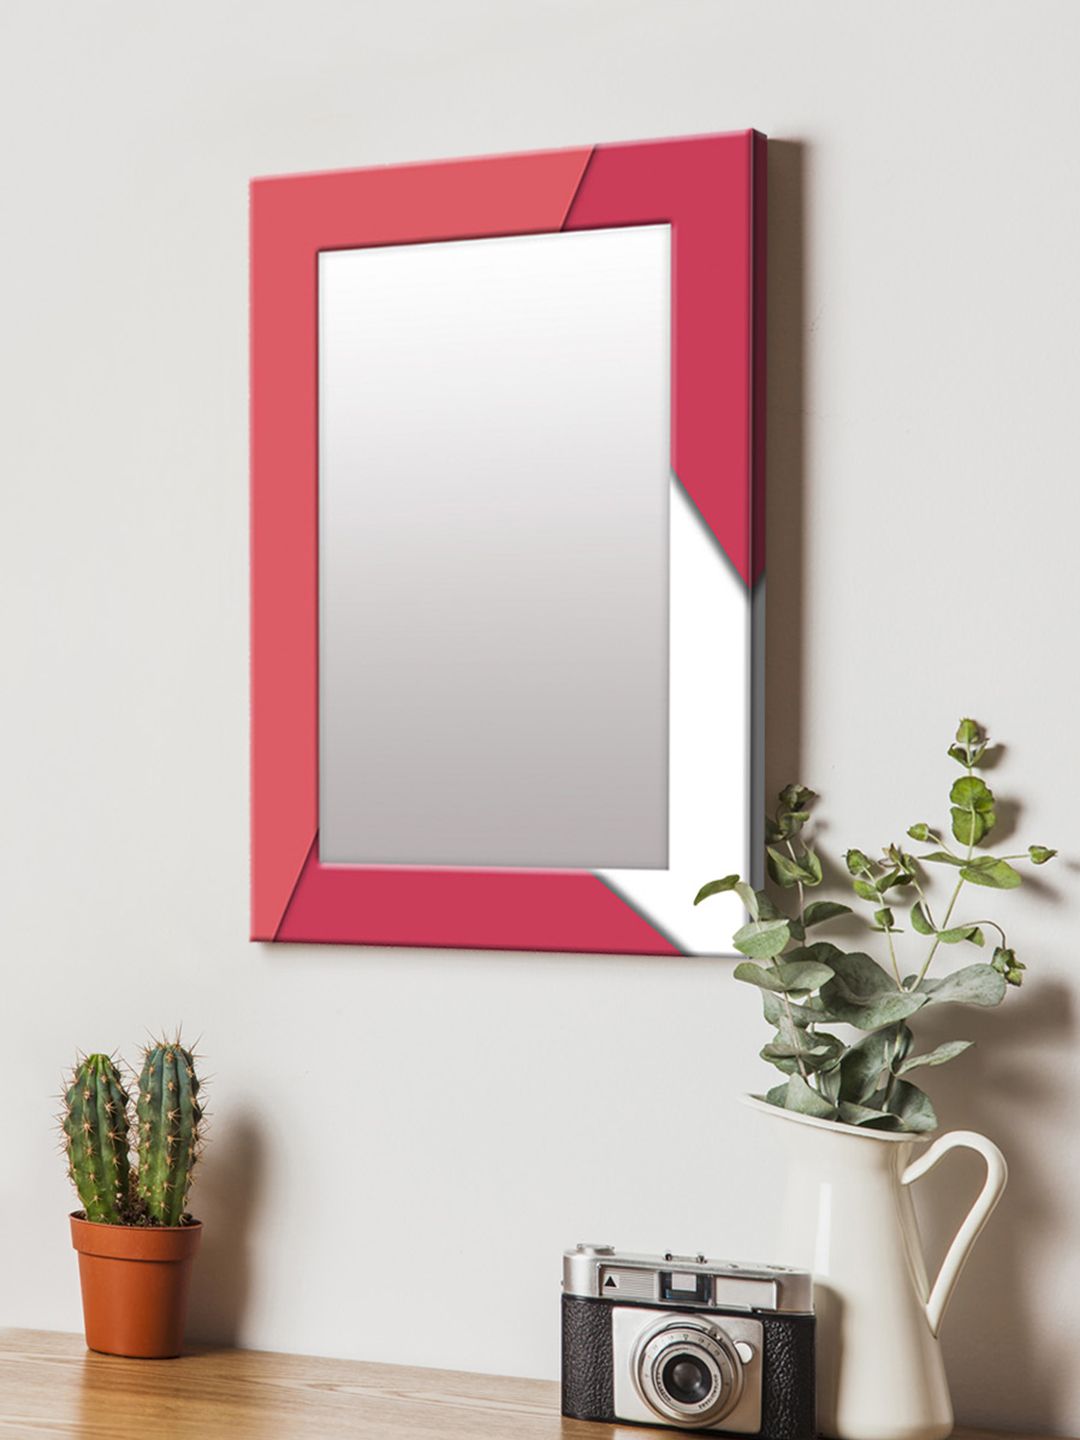 999Store Pink Printed MDF Wall Mirror Price in India